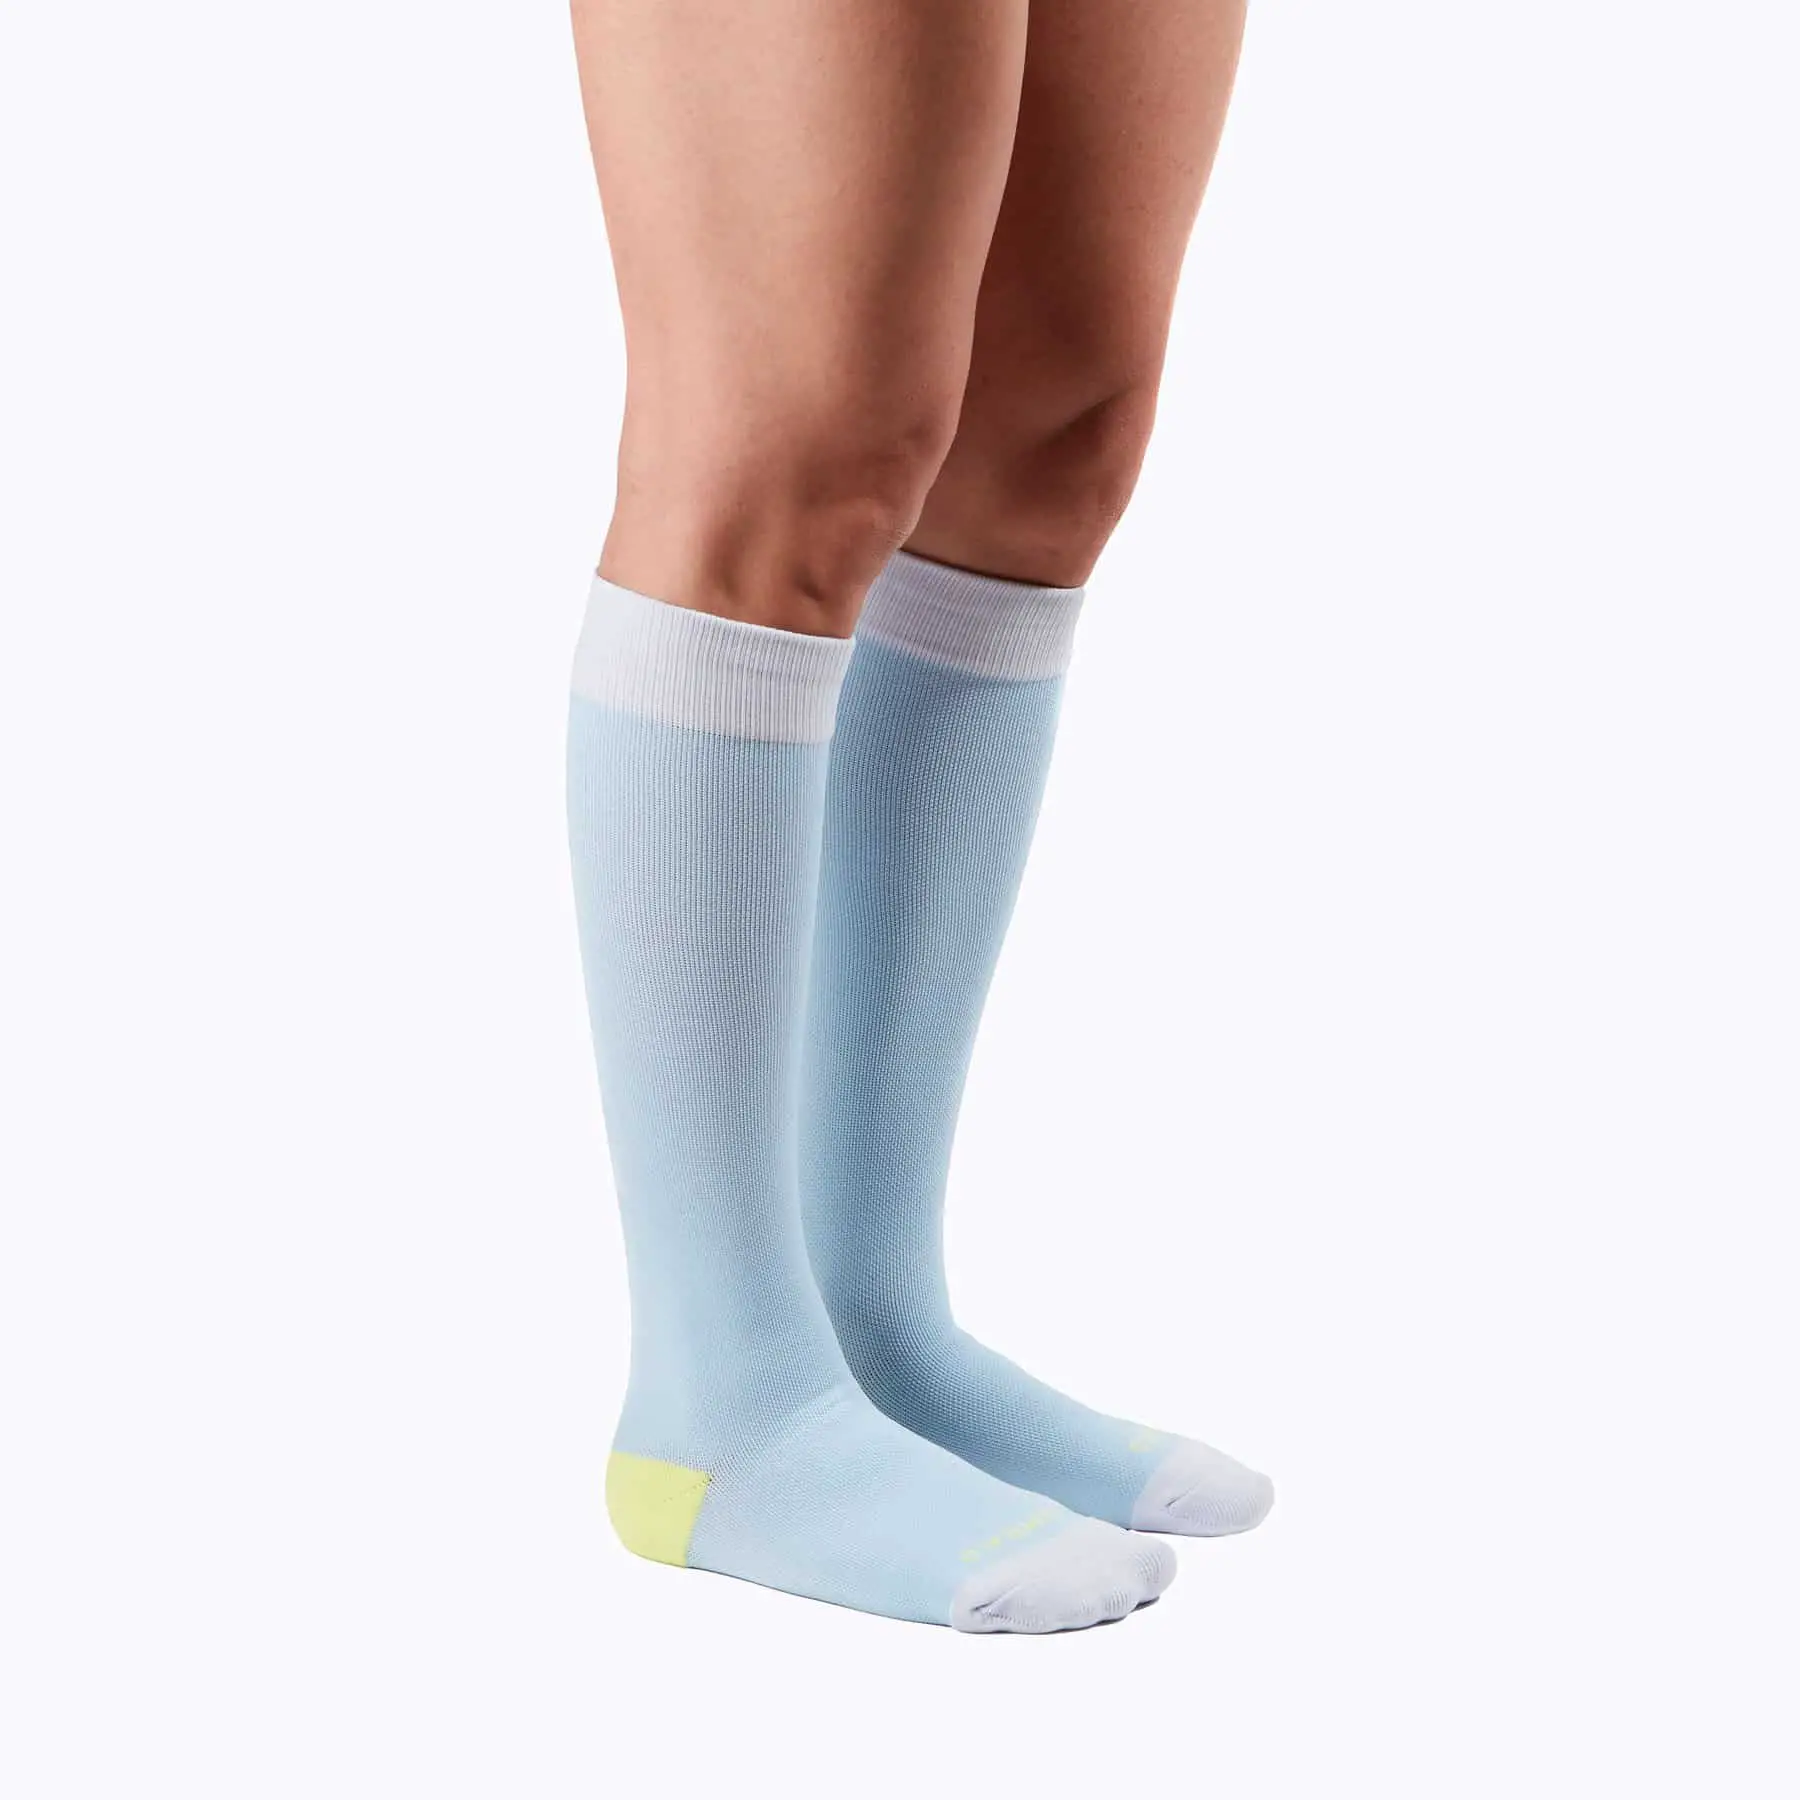 Do I really need compression socks during pregnancy?